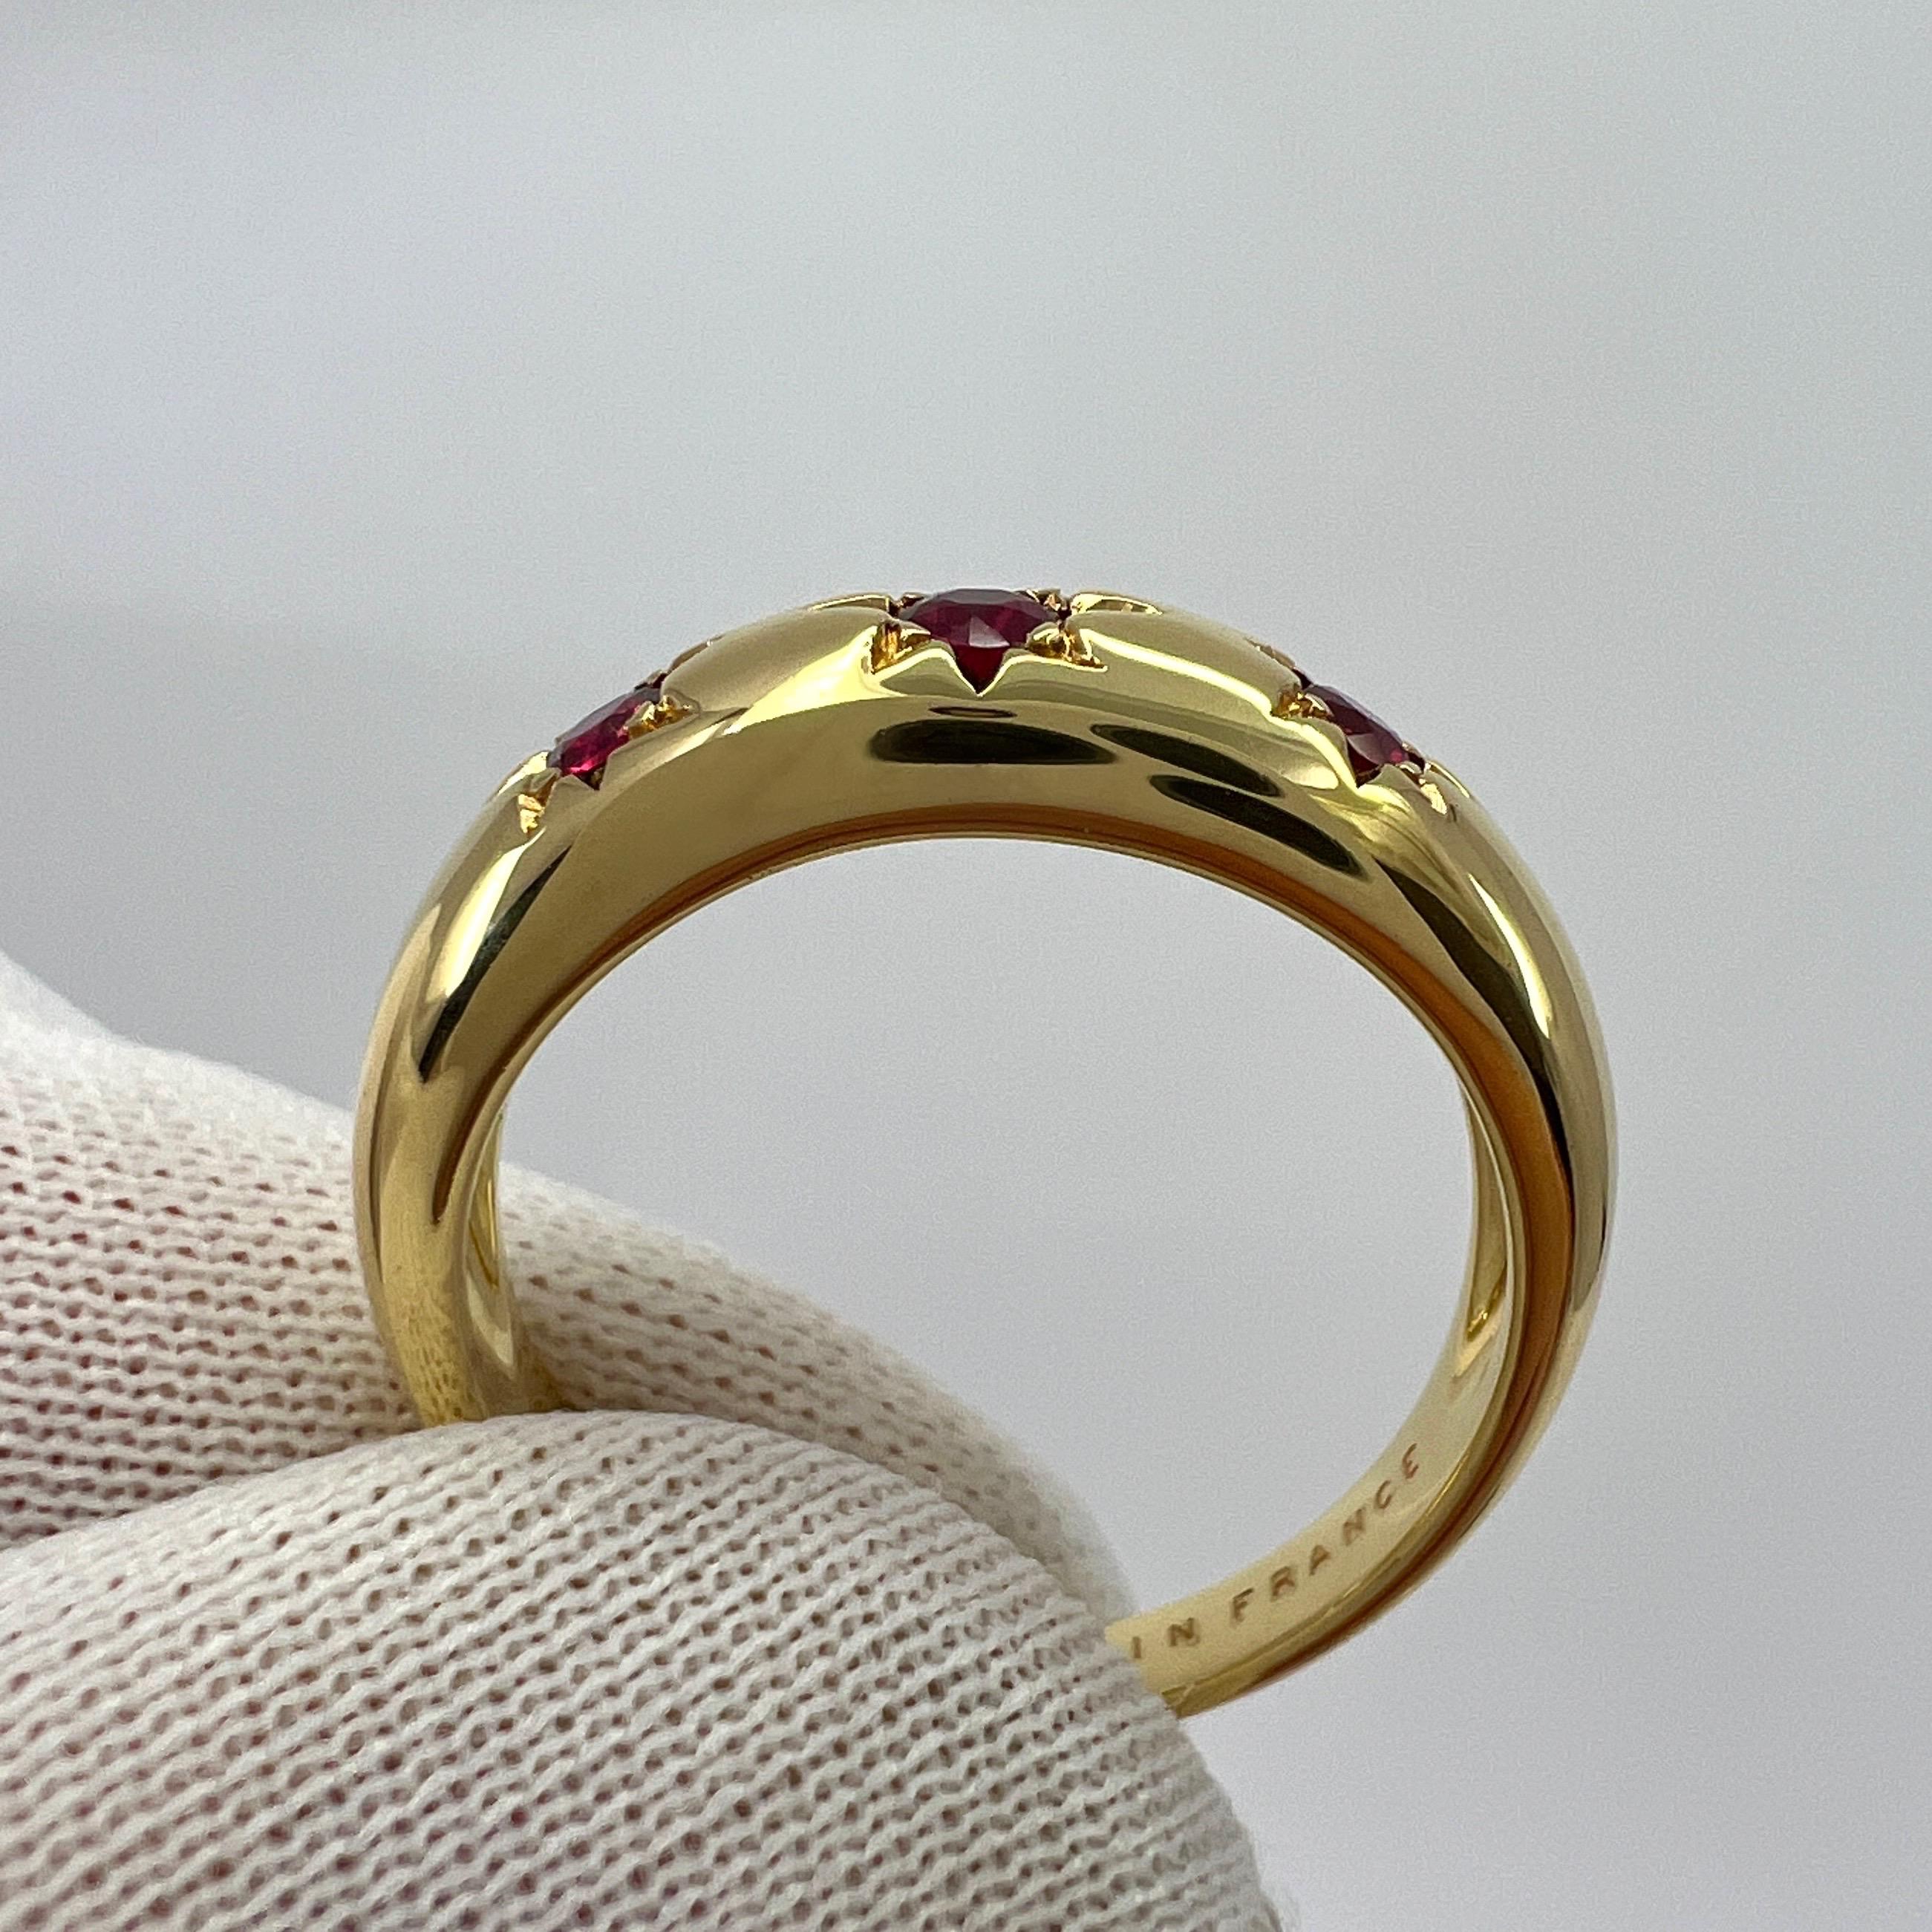 Rare Vintage Van Cleef & Arpels Star Set Ruby 18k Yellow Gold Three Stone Ring For Sale 2